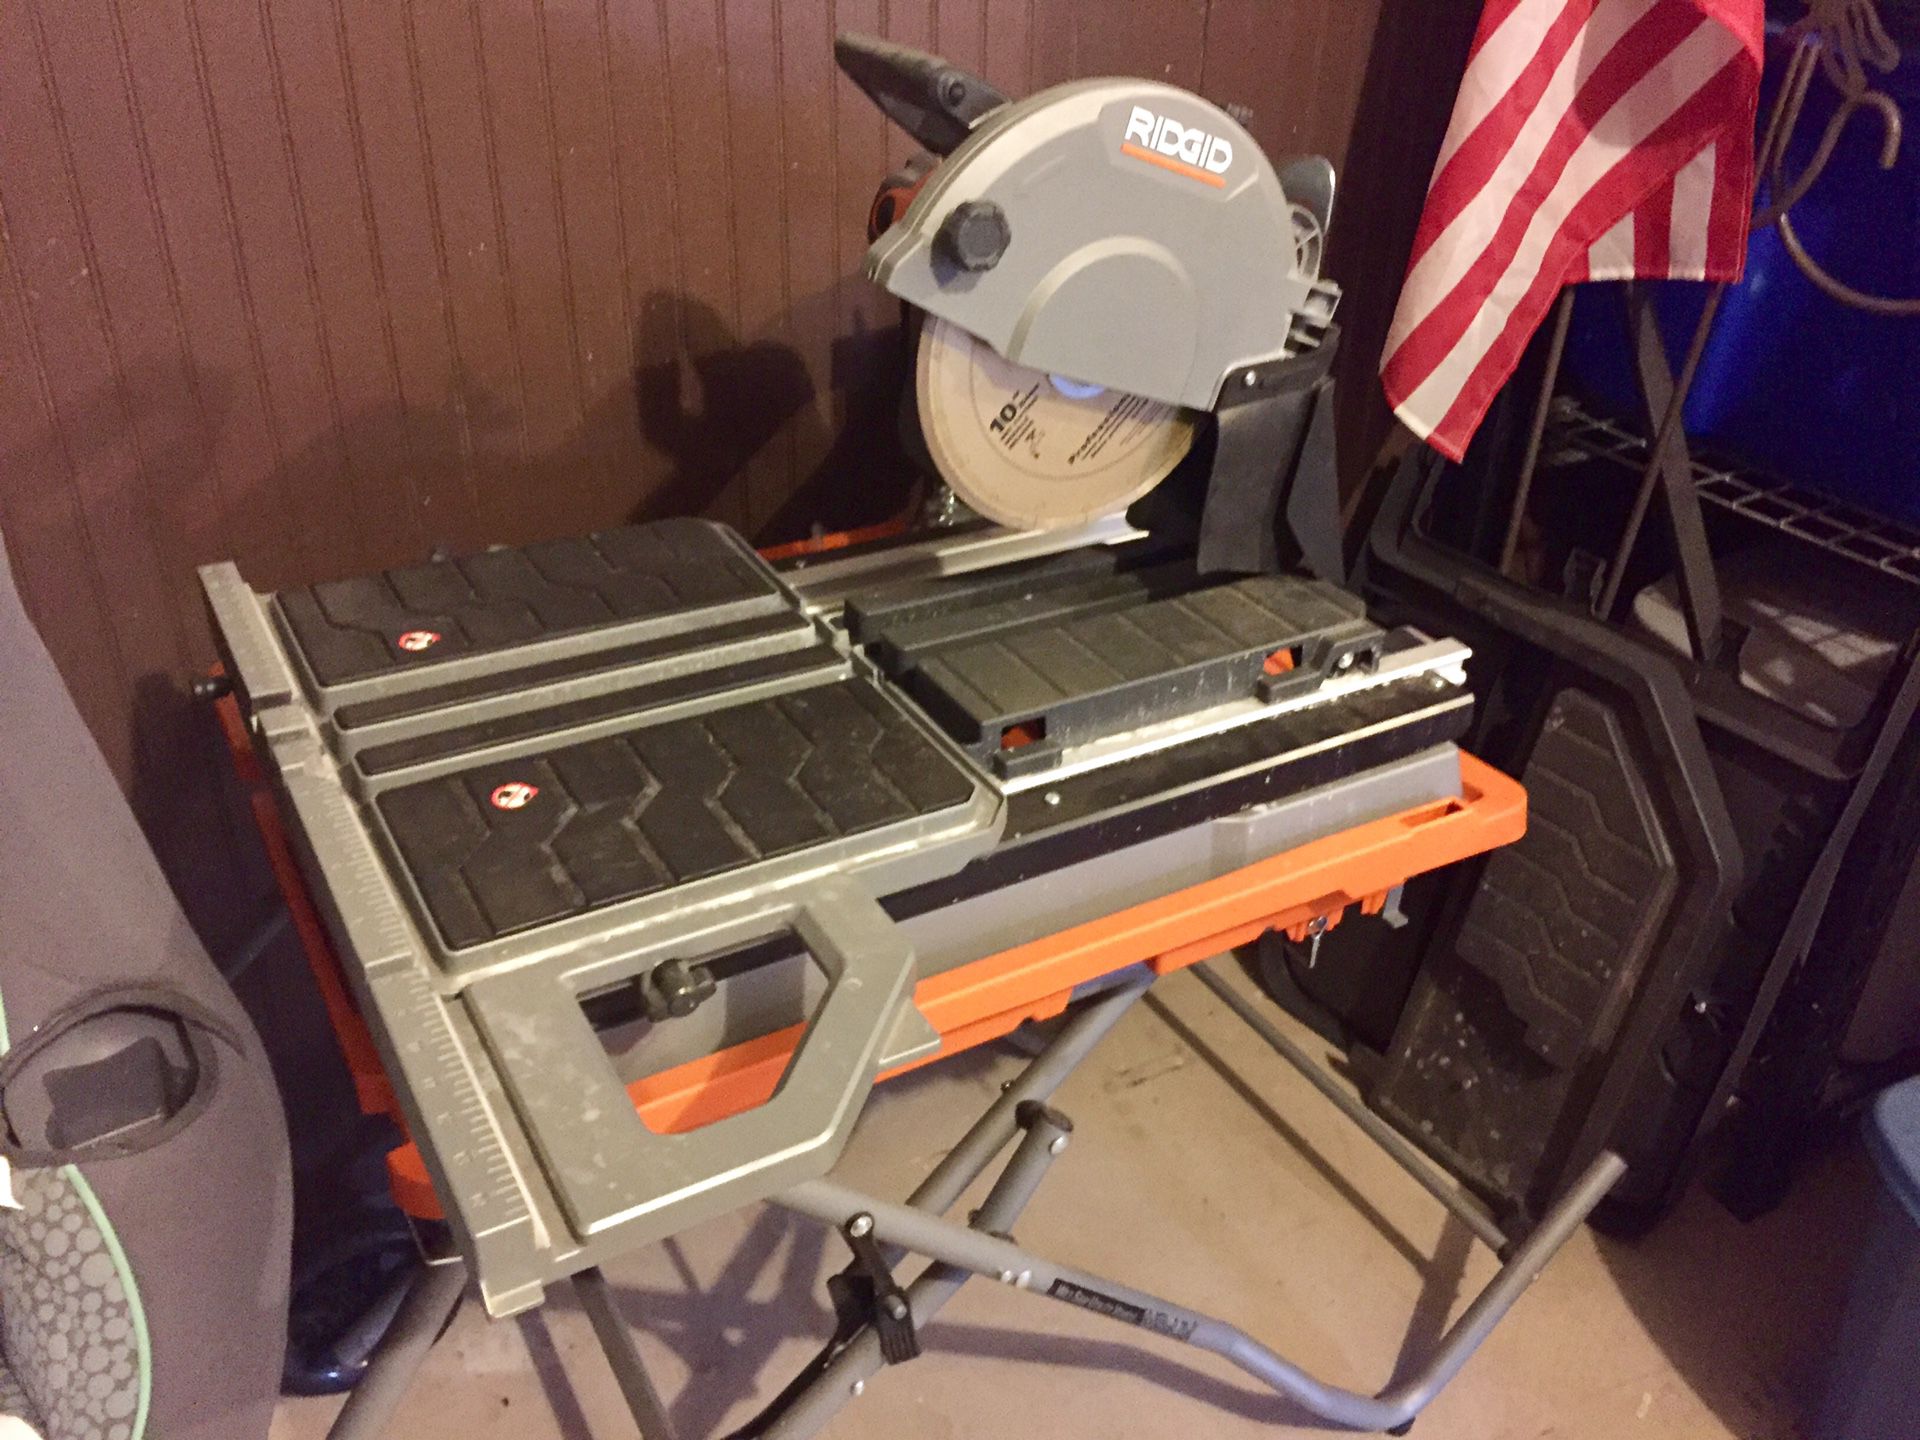 10” Rigid Wet Tile Saw With Stand & Tons Of Masonry/Tile Tools - Excellent Condition